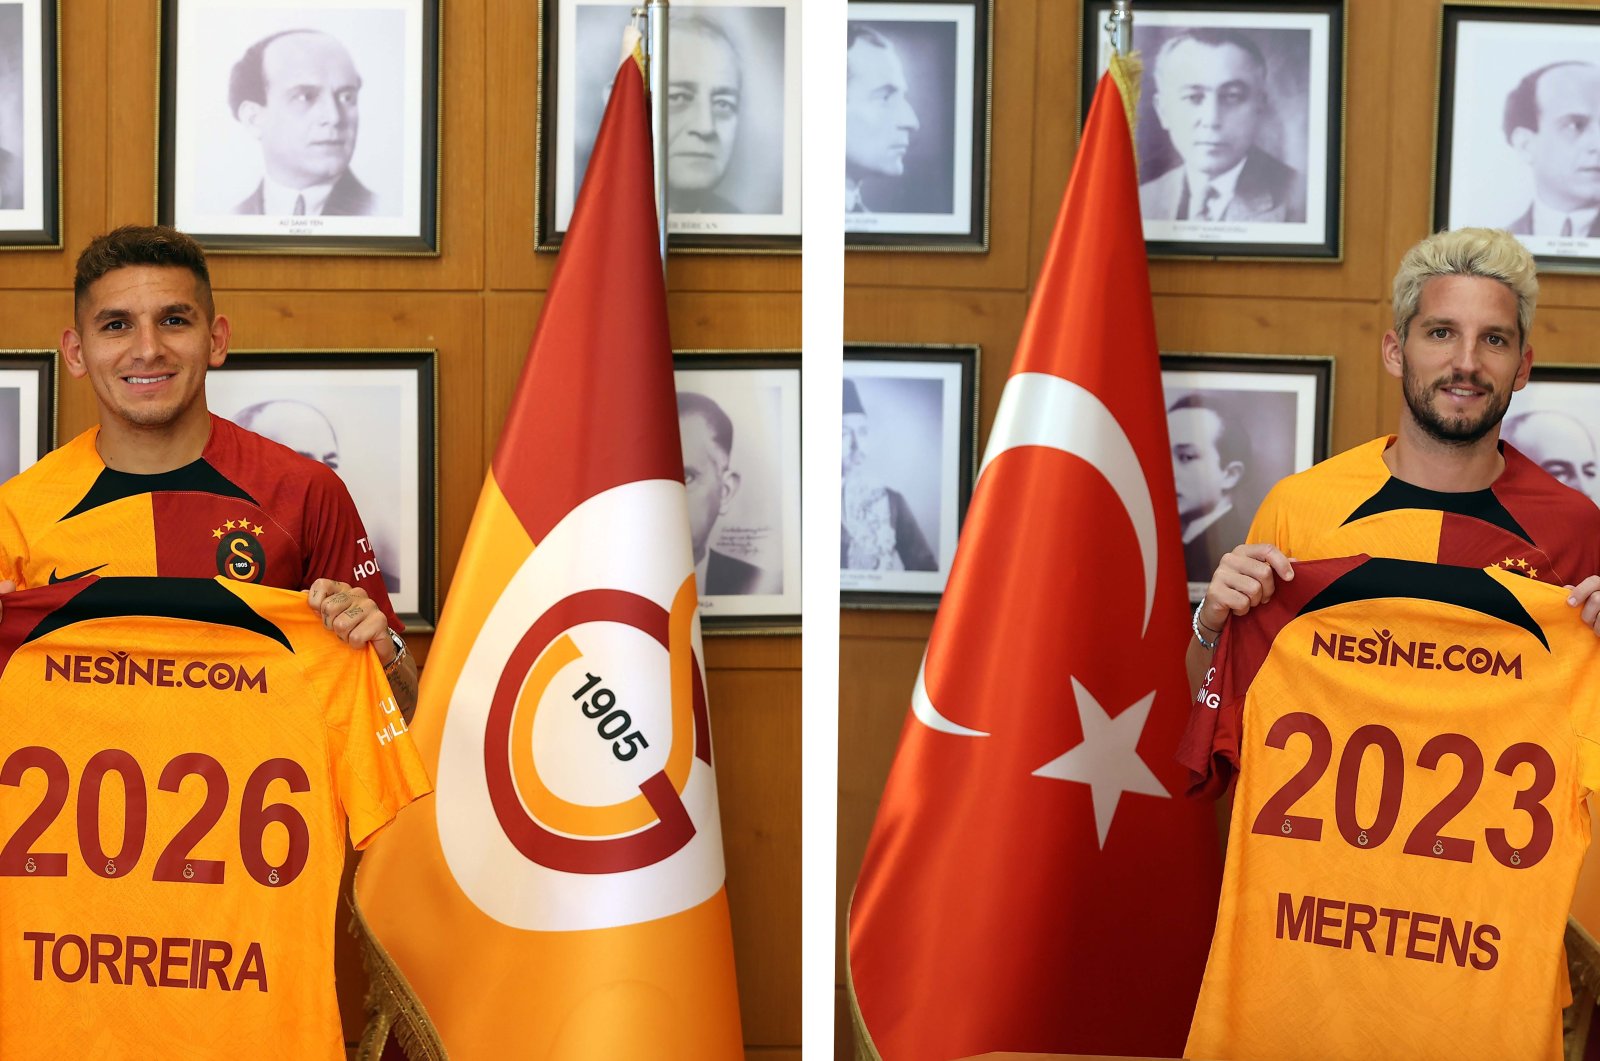 Uruguay midfielder Lucas Torreira (L) and Belgium forward Dries Mertens are officially unveiled as new Galatasaray players, Istanbul, Turkey, Aug. 8, 2022. (Photos by AA)